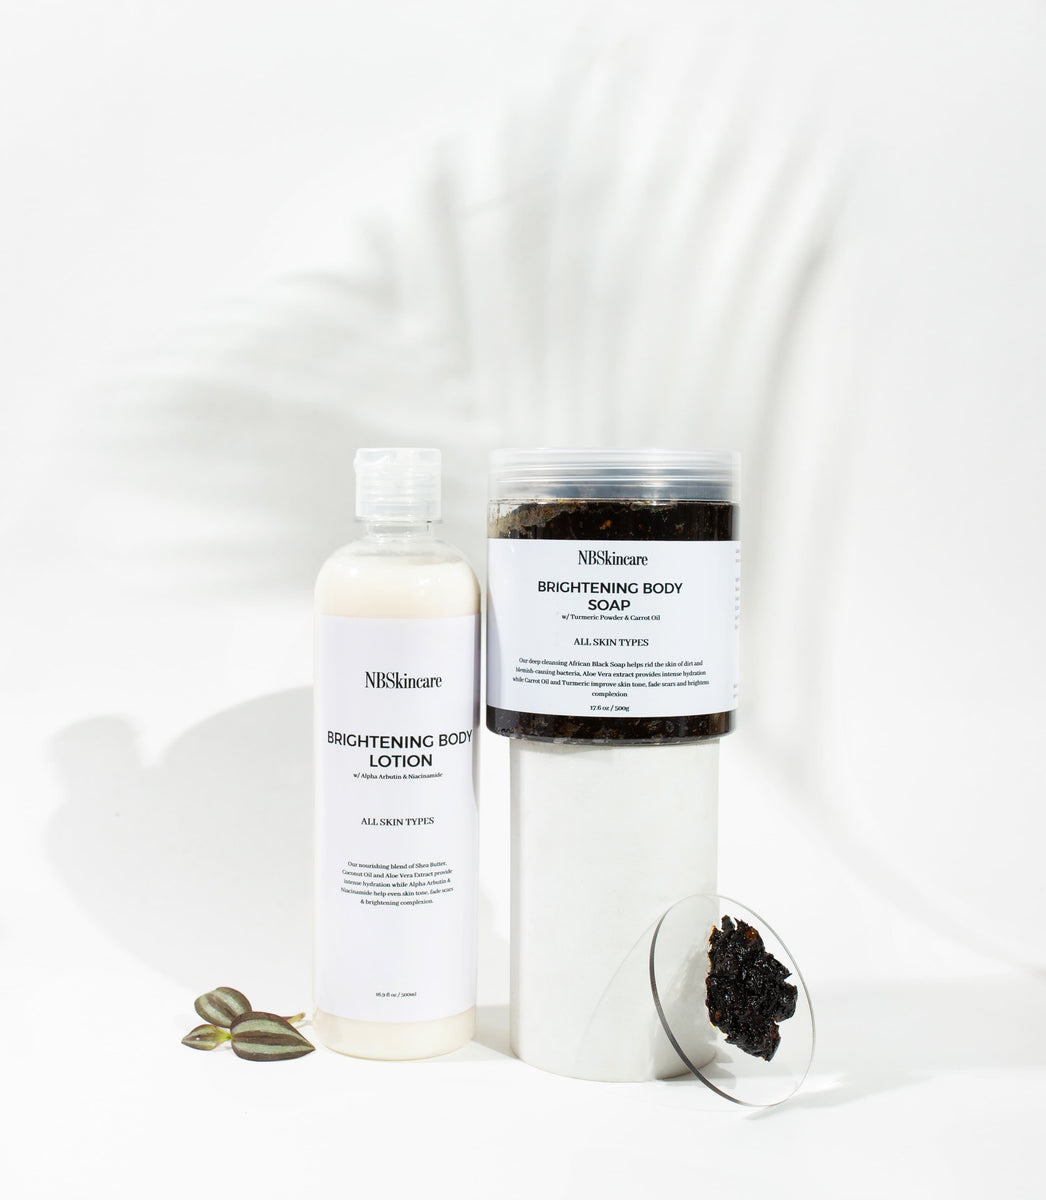 Brightening Body Lotion and Brightening Body Soap